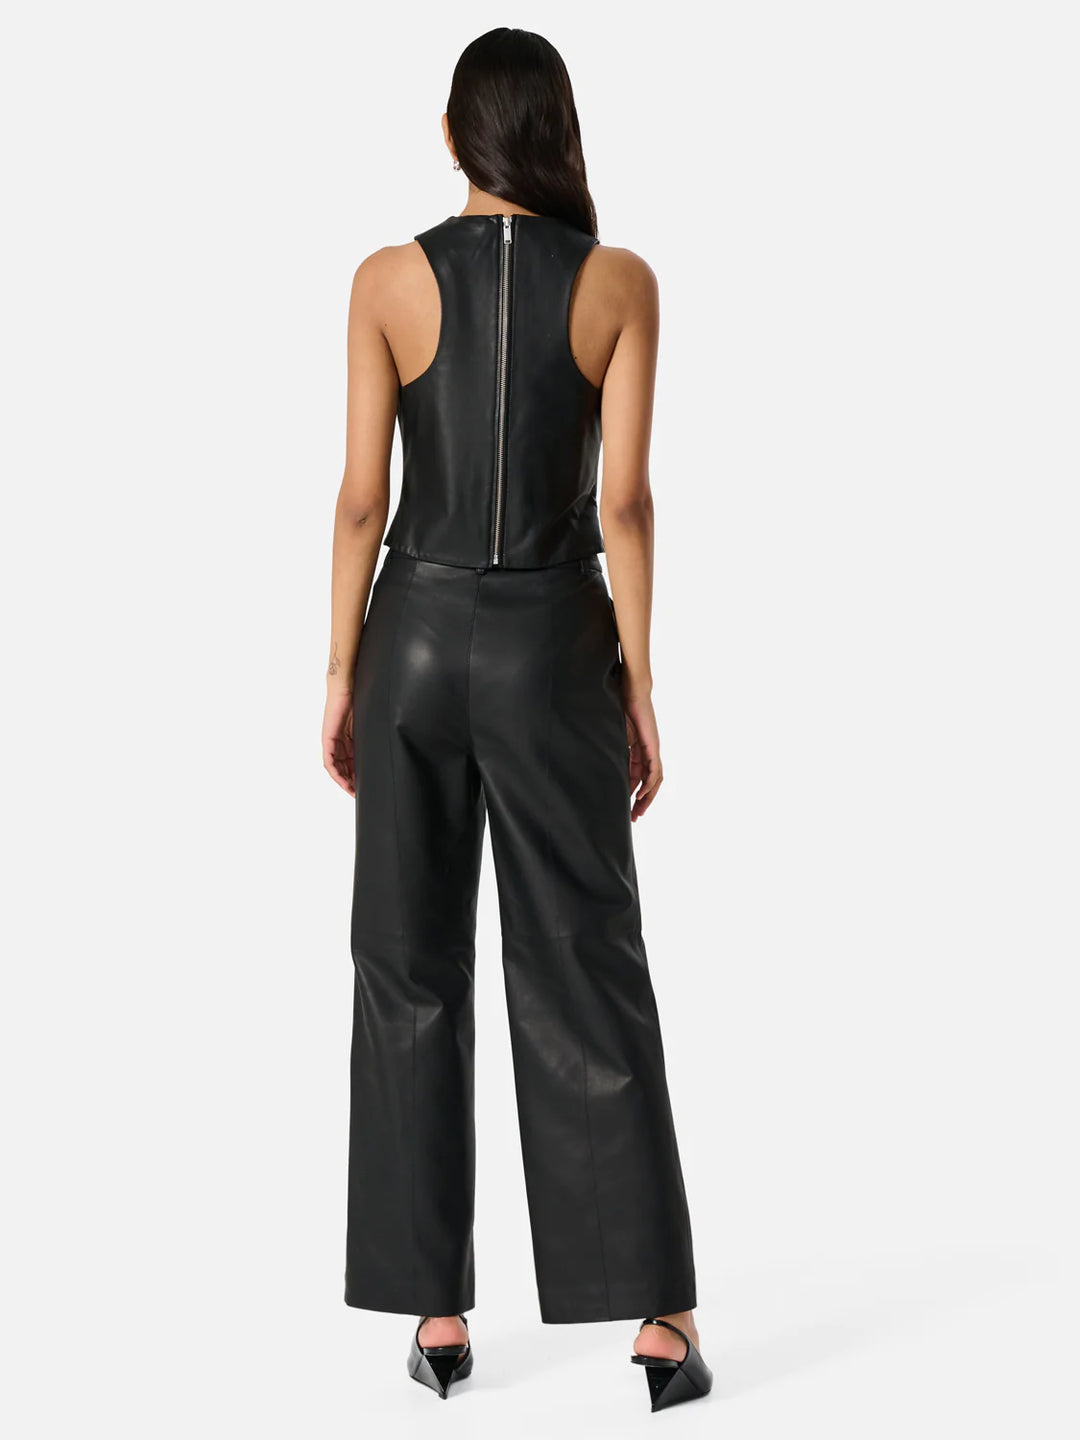 Stanford Leather Pant- Black